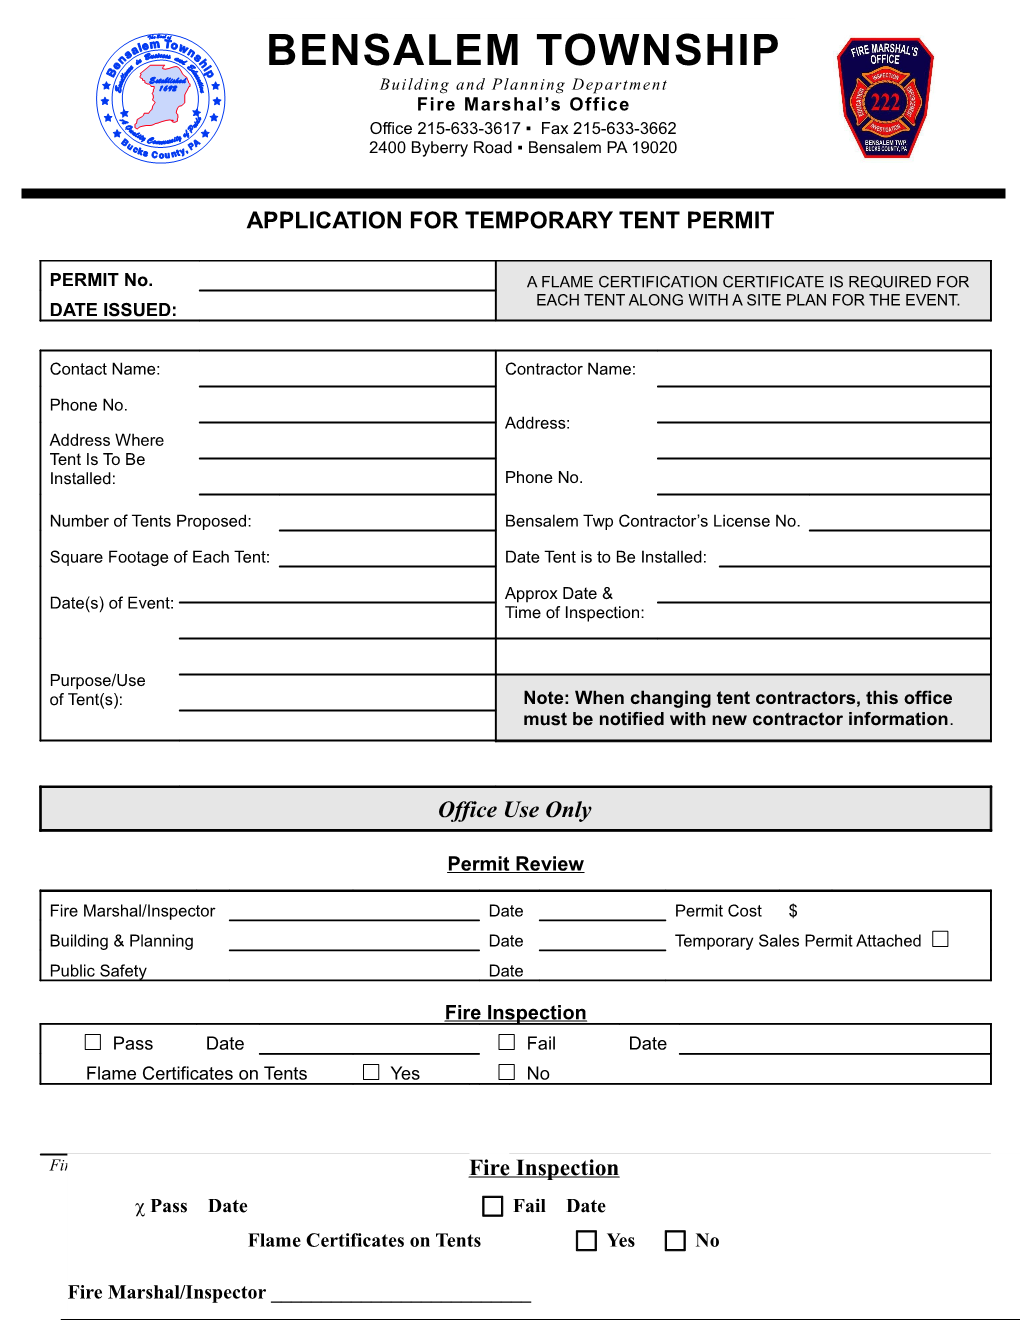 Application for Temporary Tent Permit